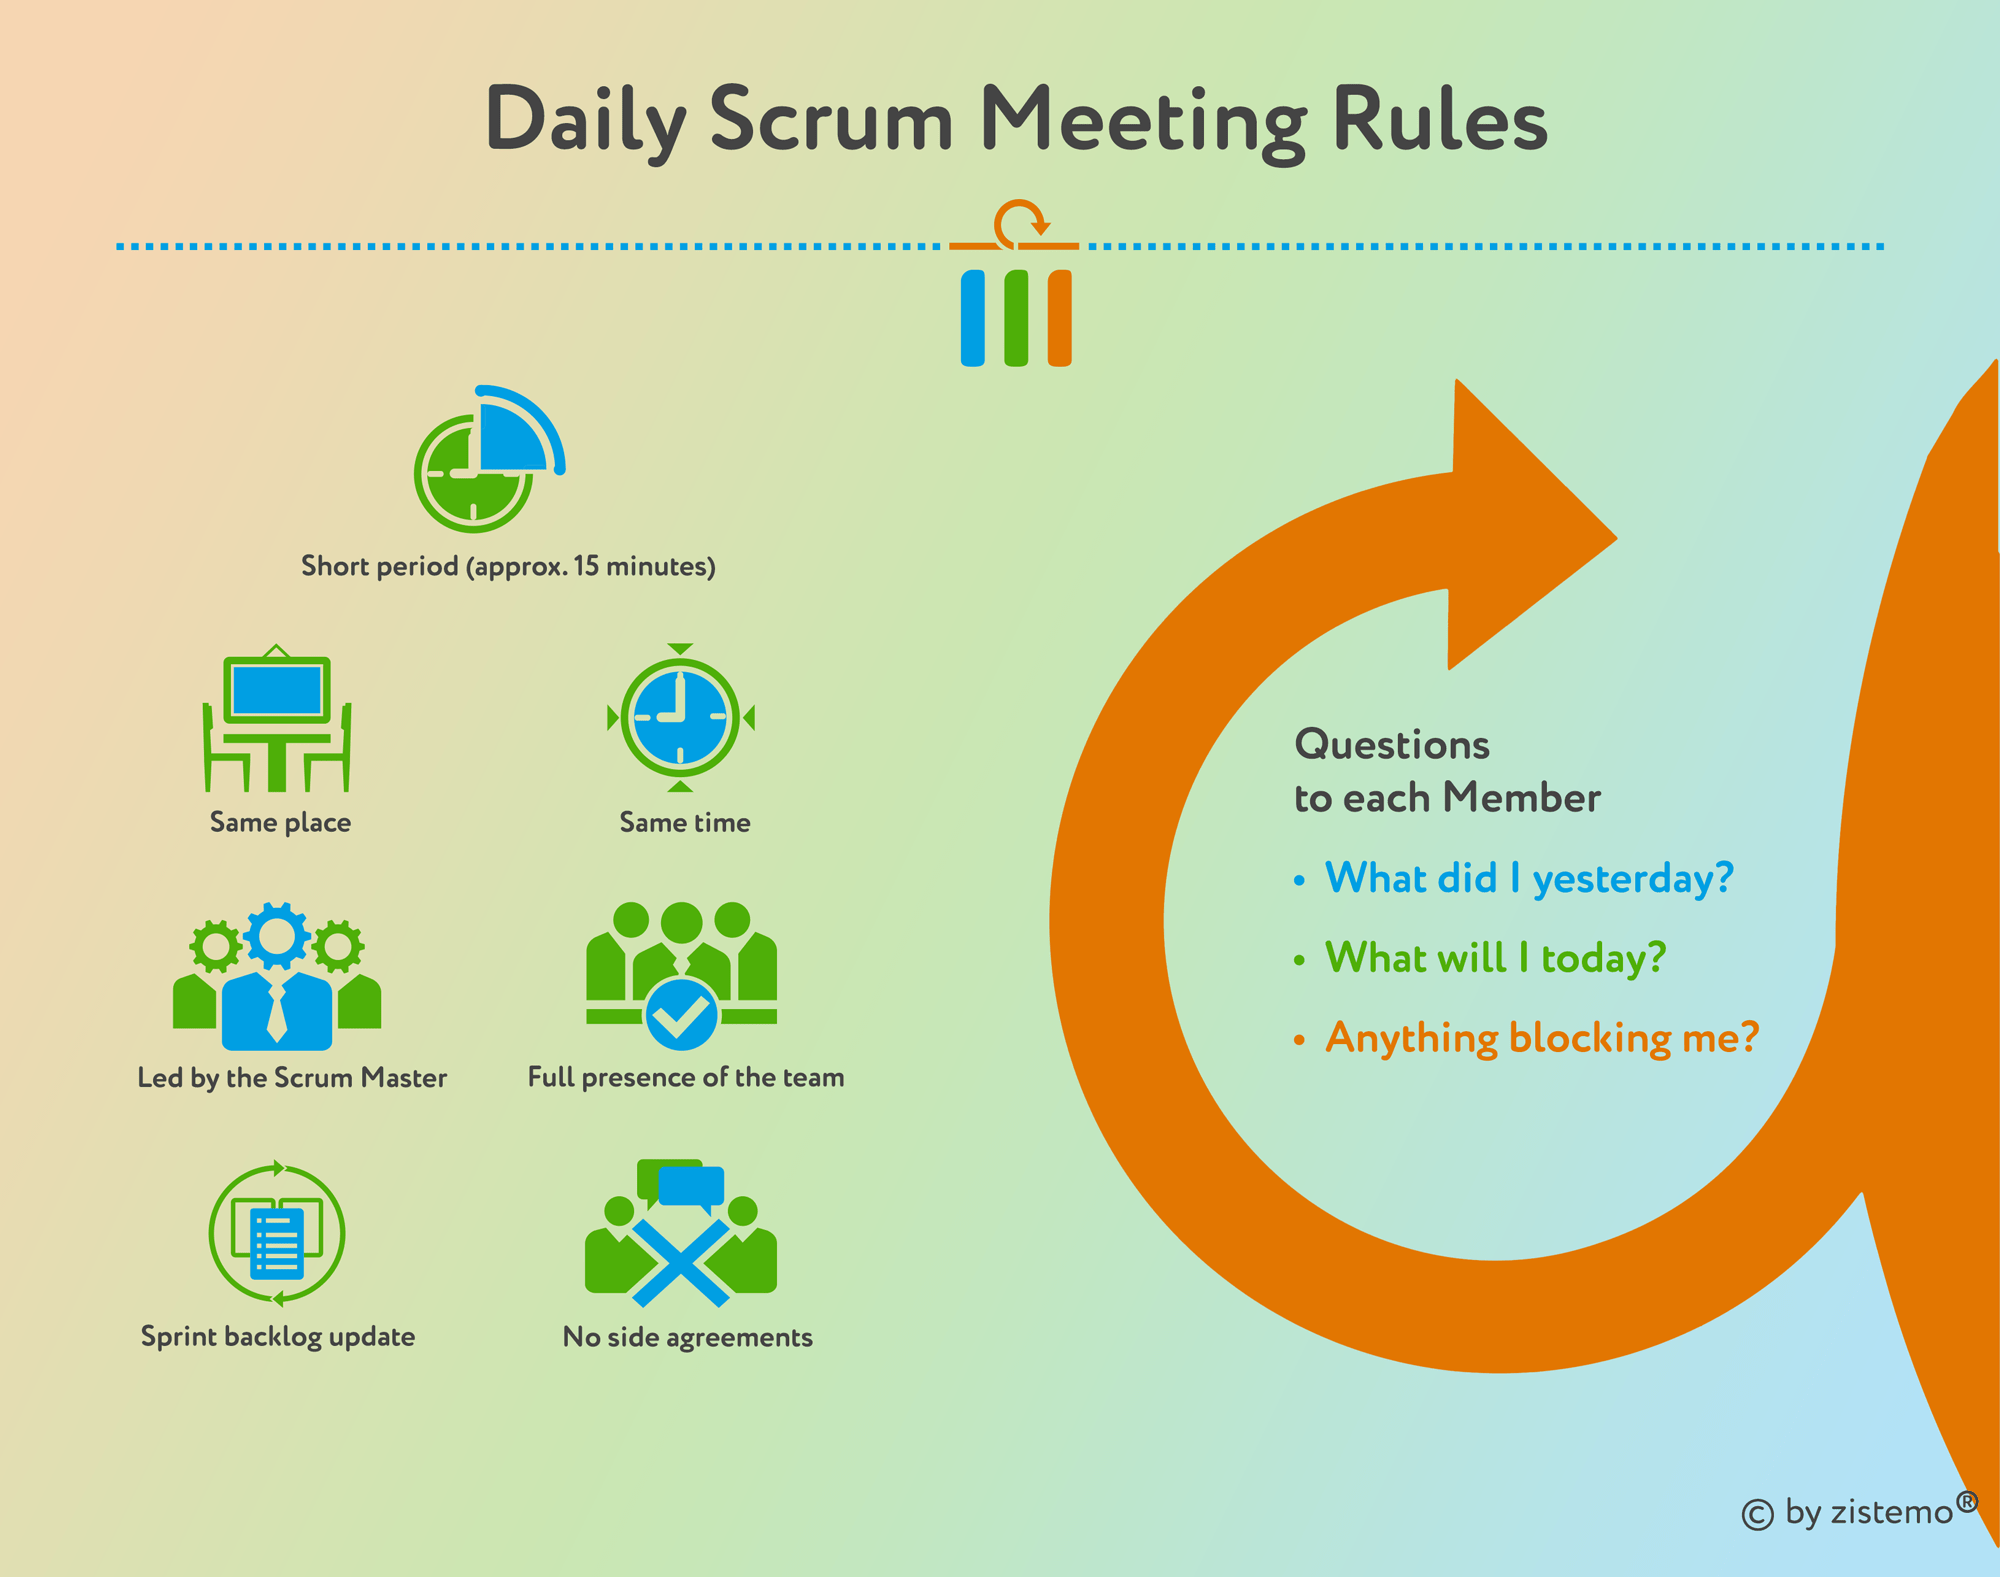 zistemo: Mastering the Daily Scrum Meeting Rules